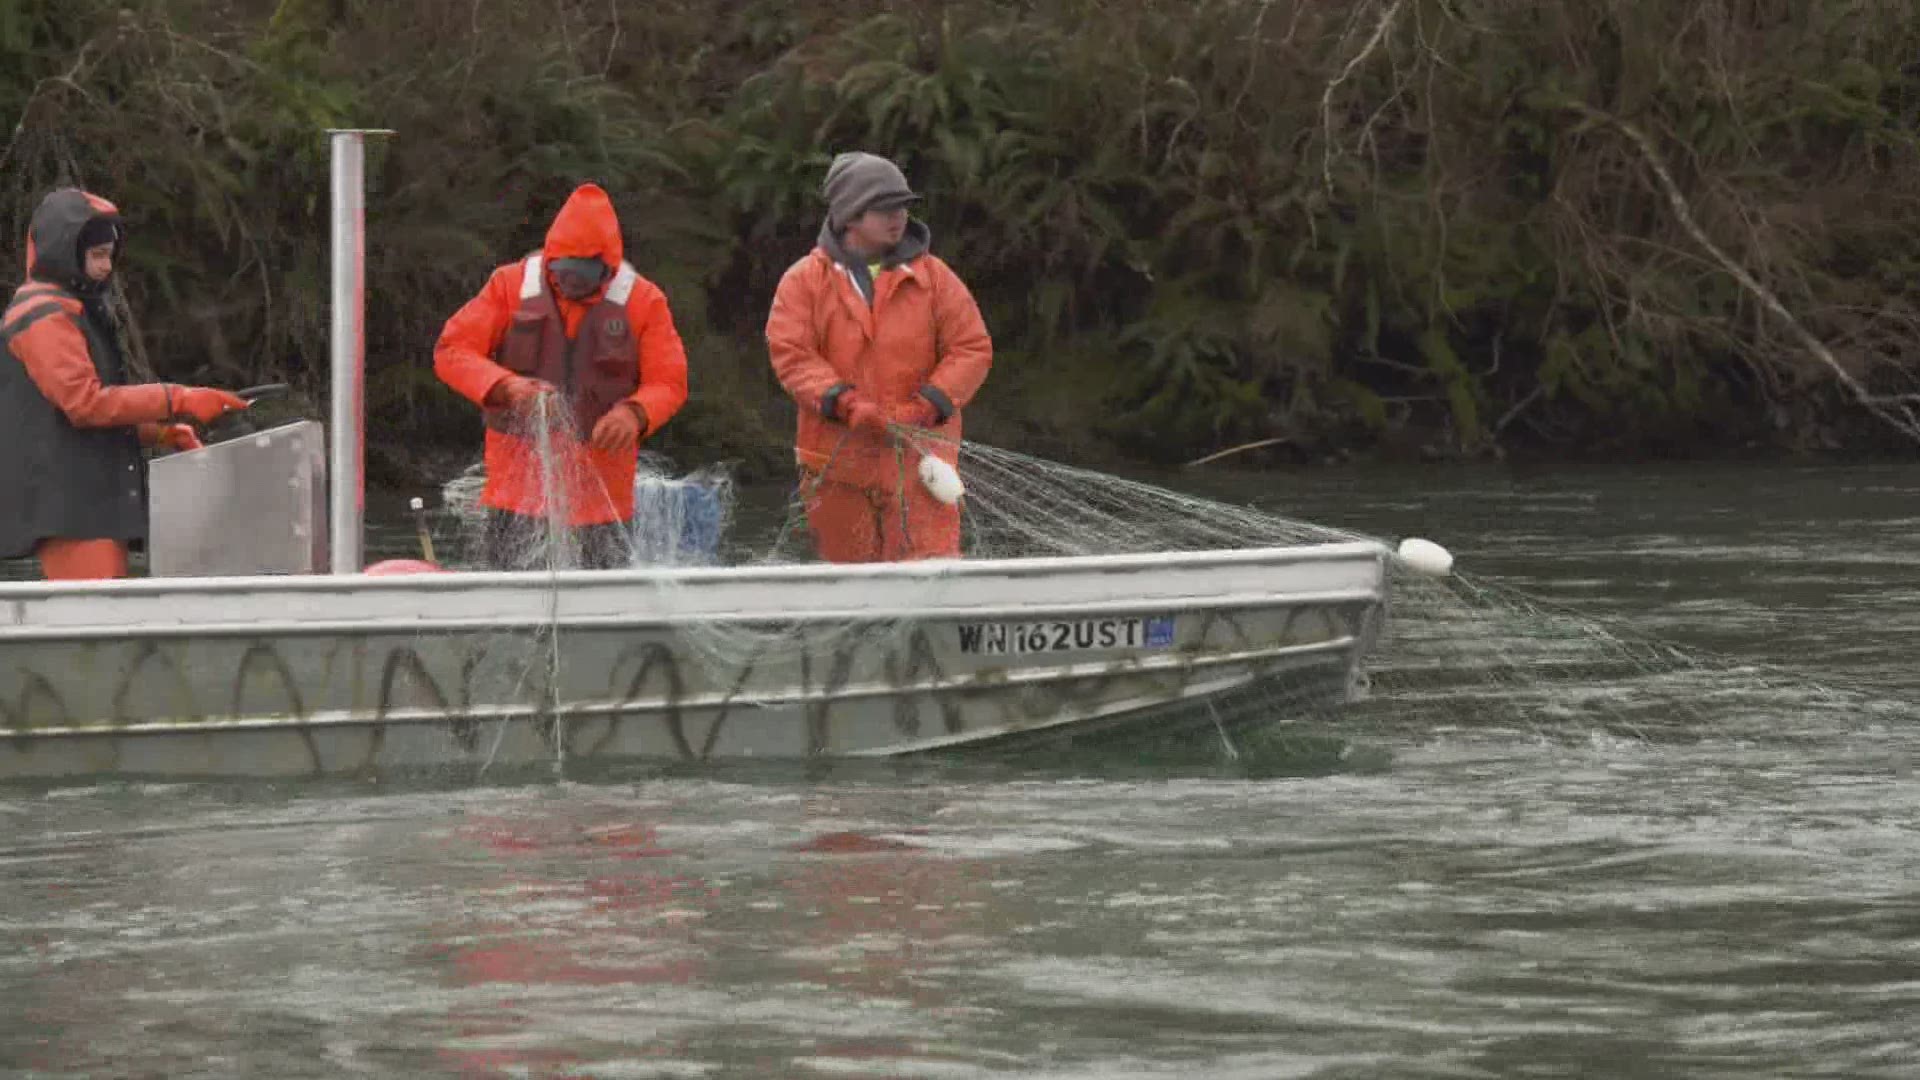 Viewers and online readers have accused tribes of ruining salmon runs due to unfair practices, including the use of gillnets in the rivers.